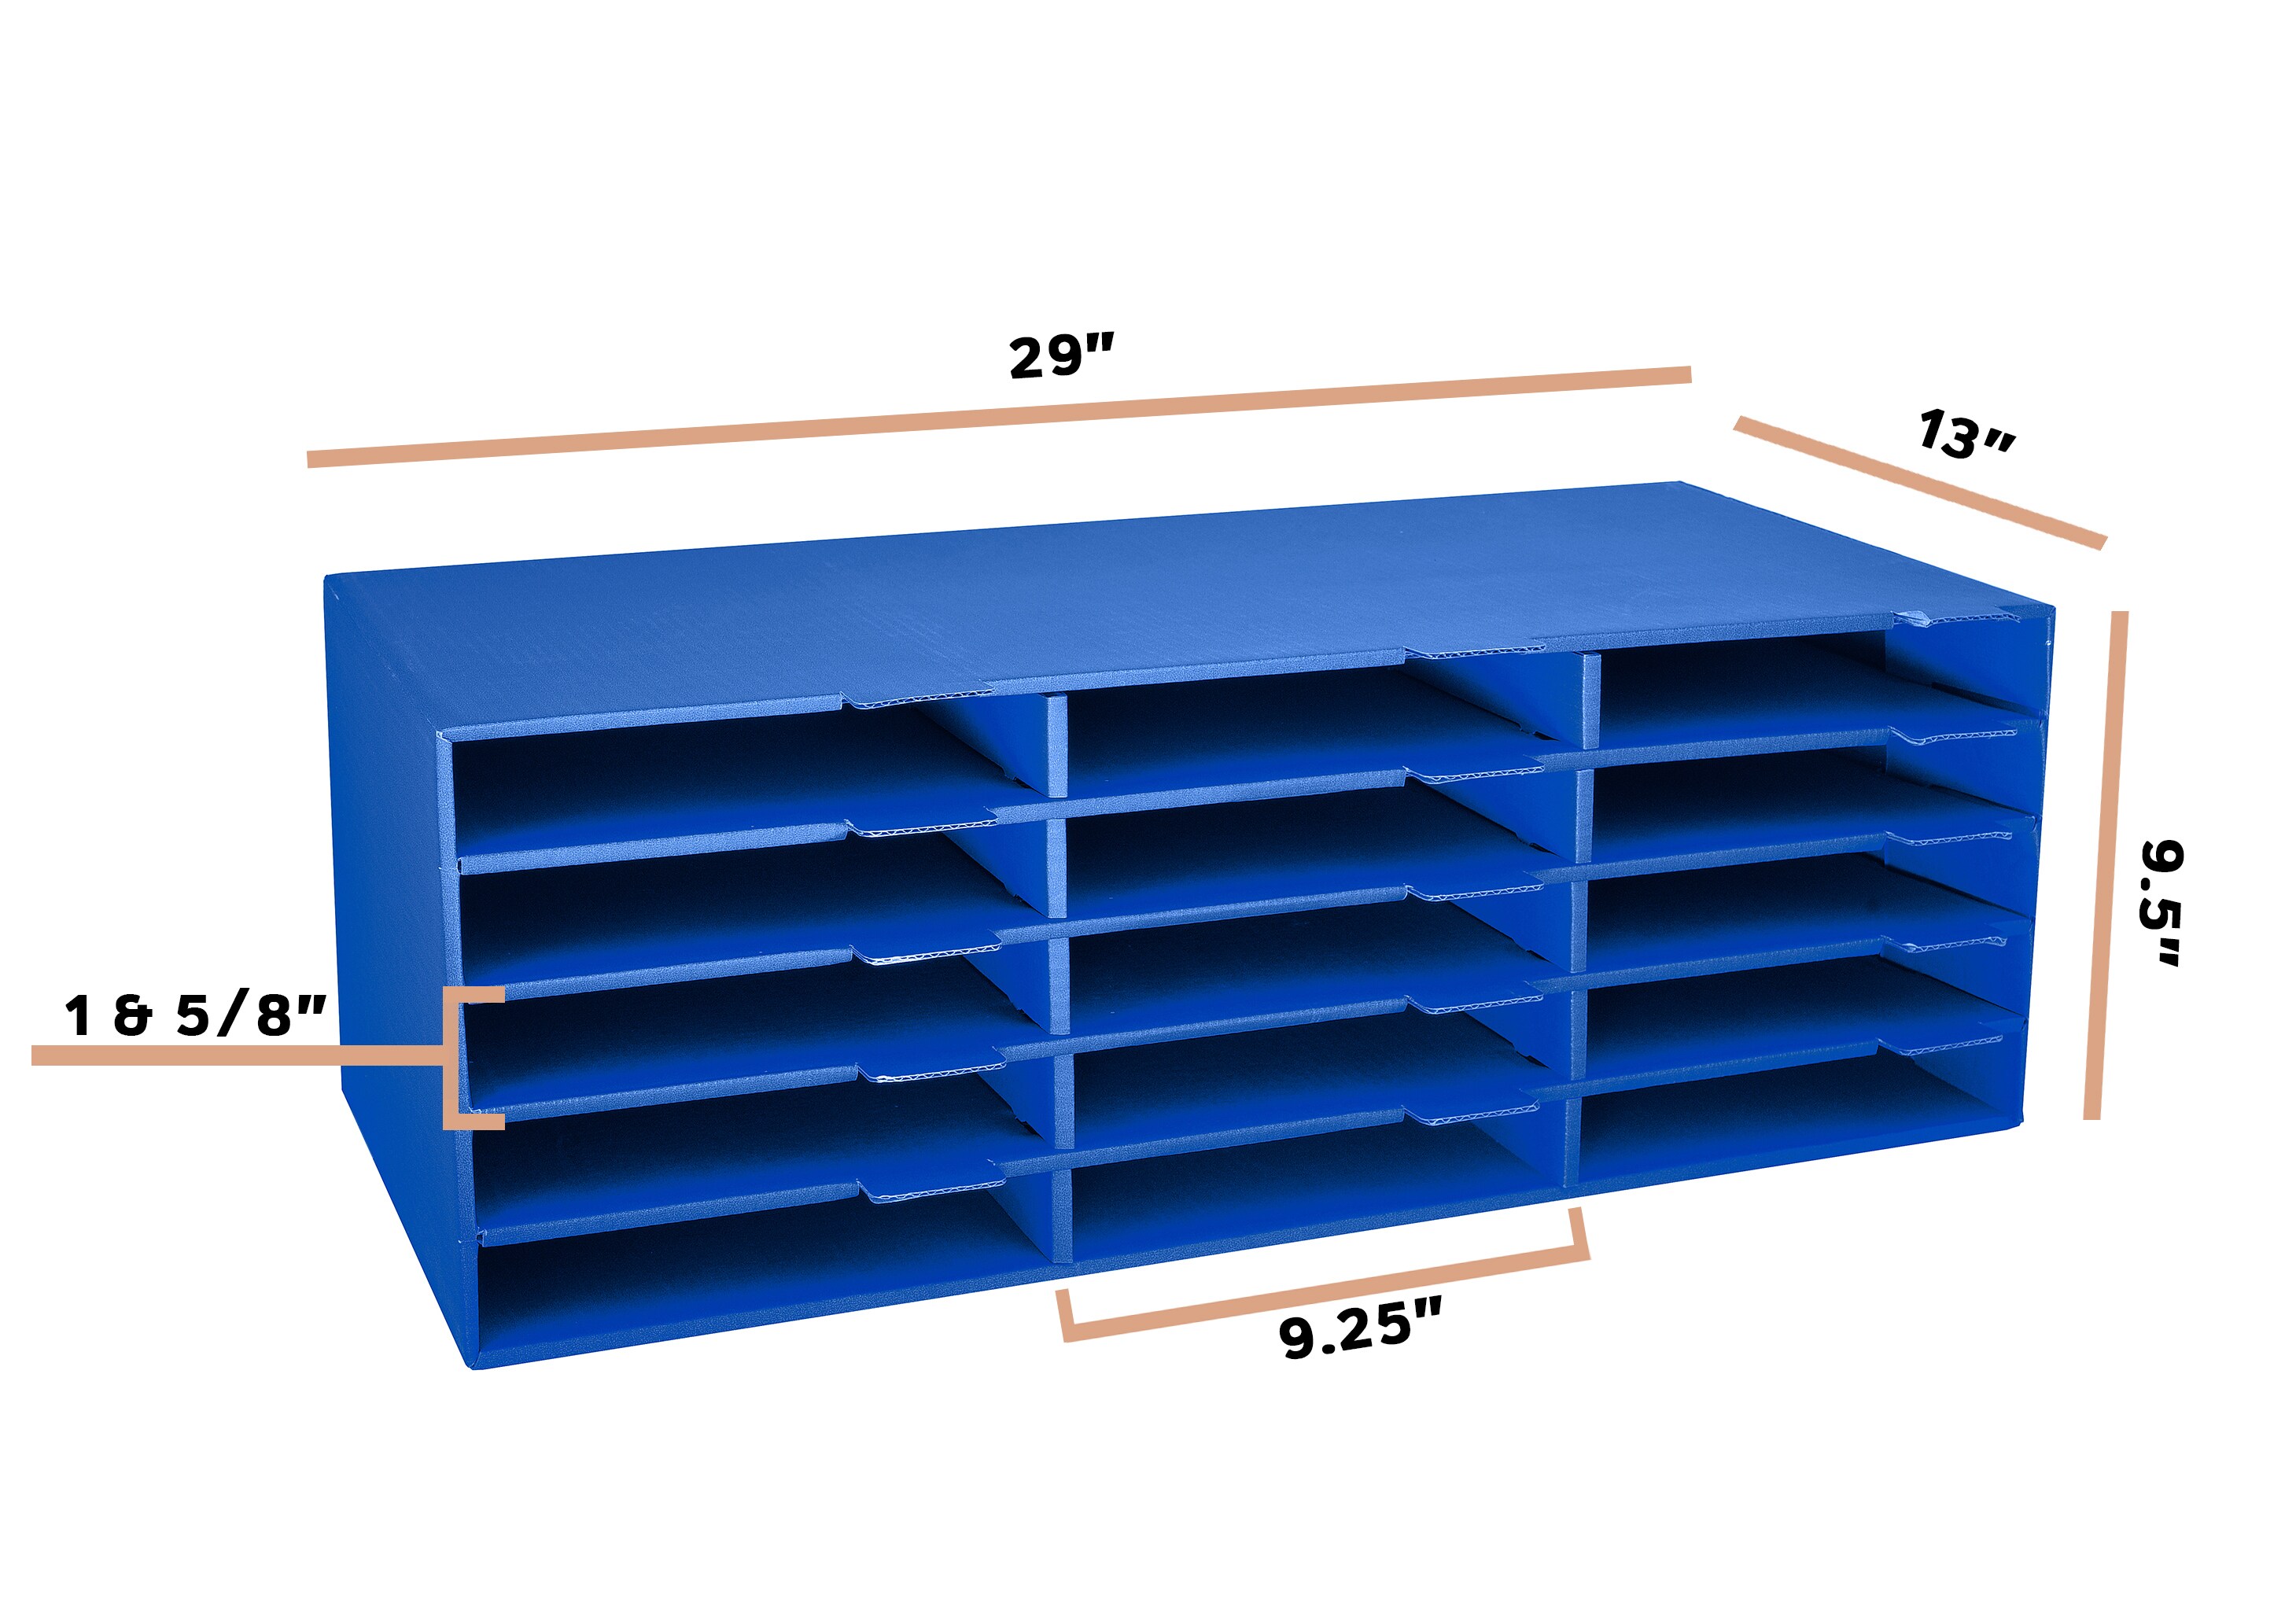 Classroom Keepers 12 x 18 Construction Paper Storage, 10 Slots